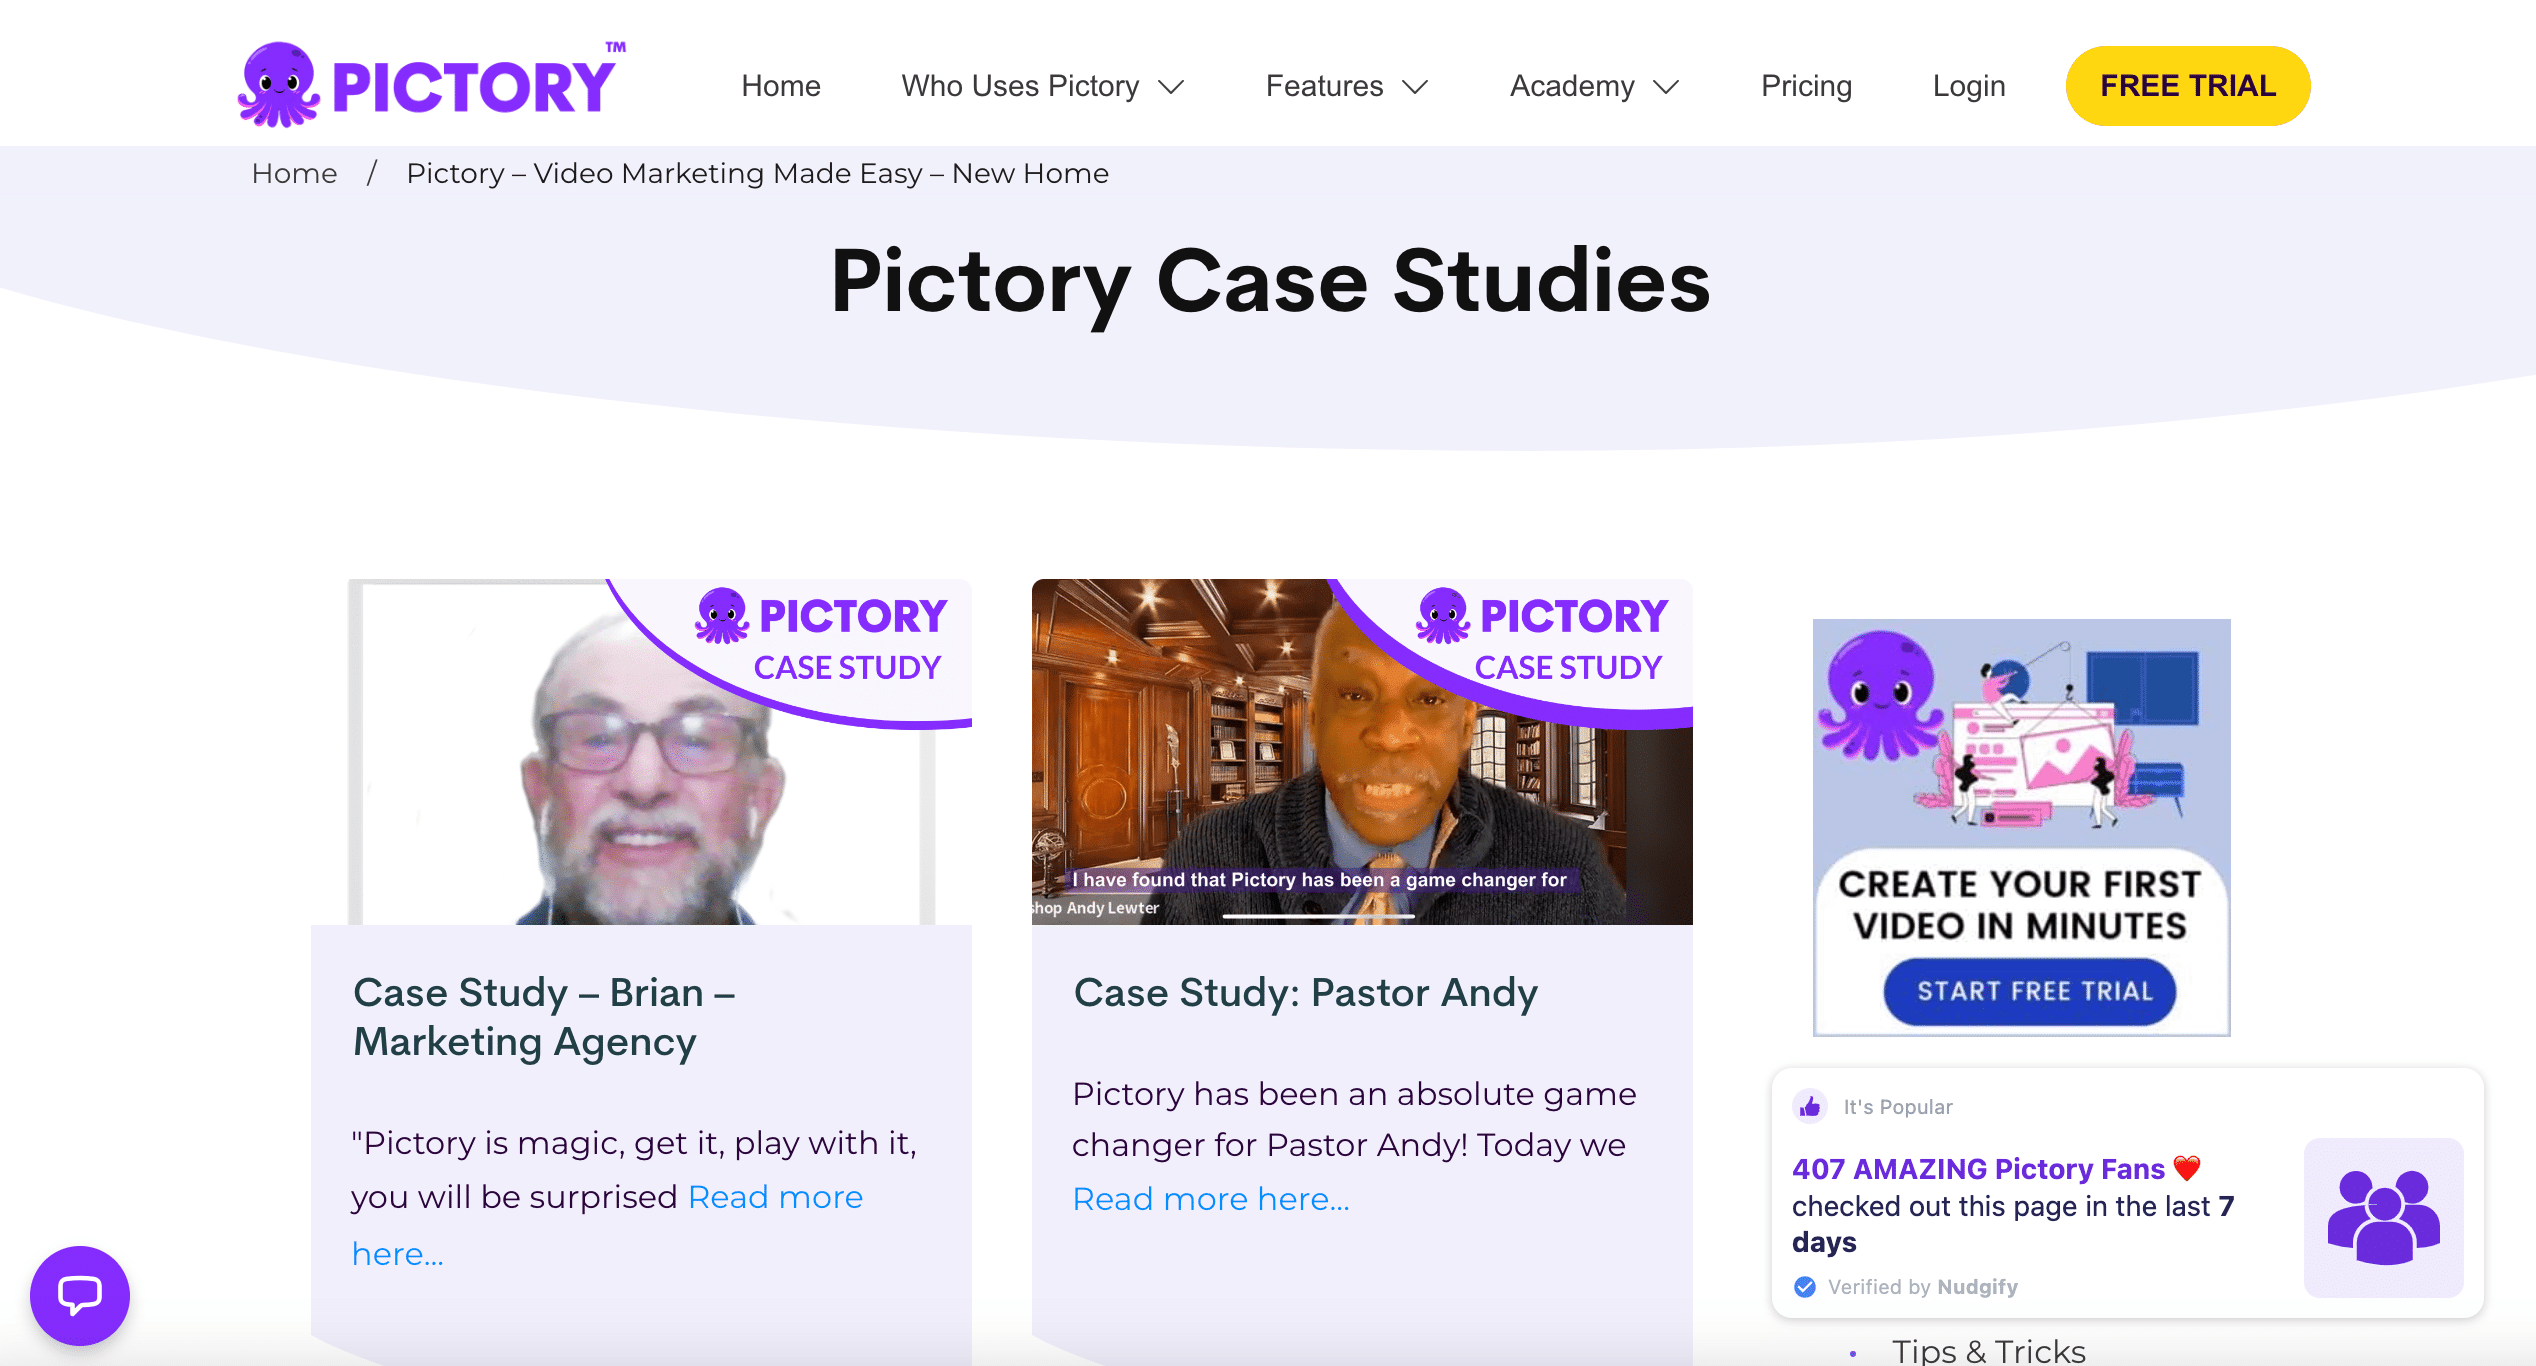 An example of a Pictory case study.